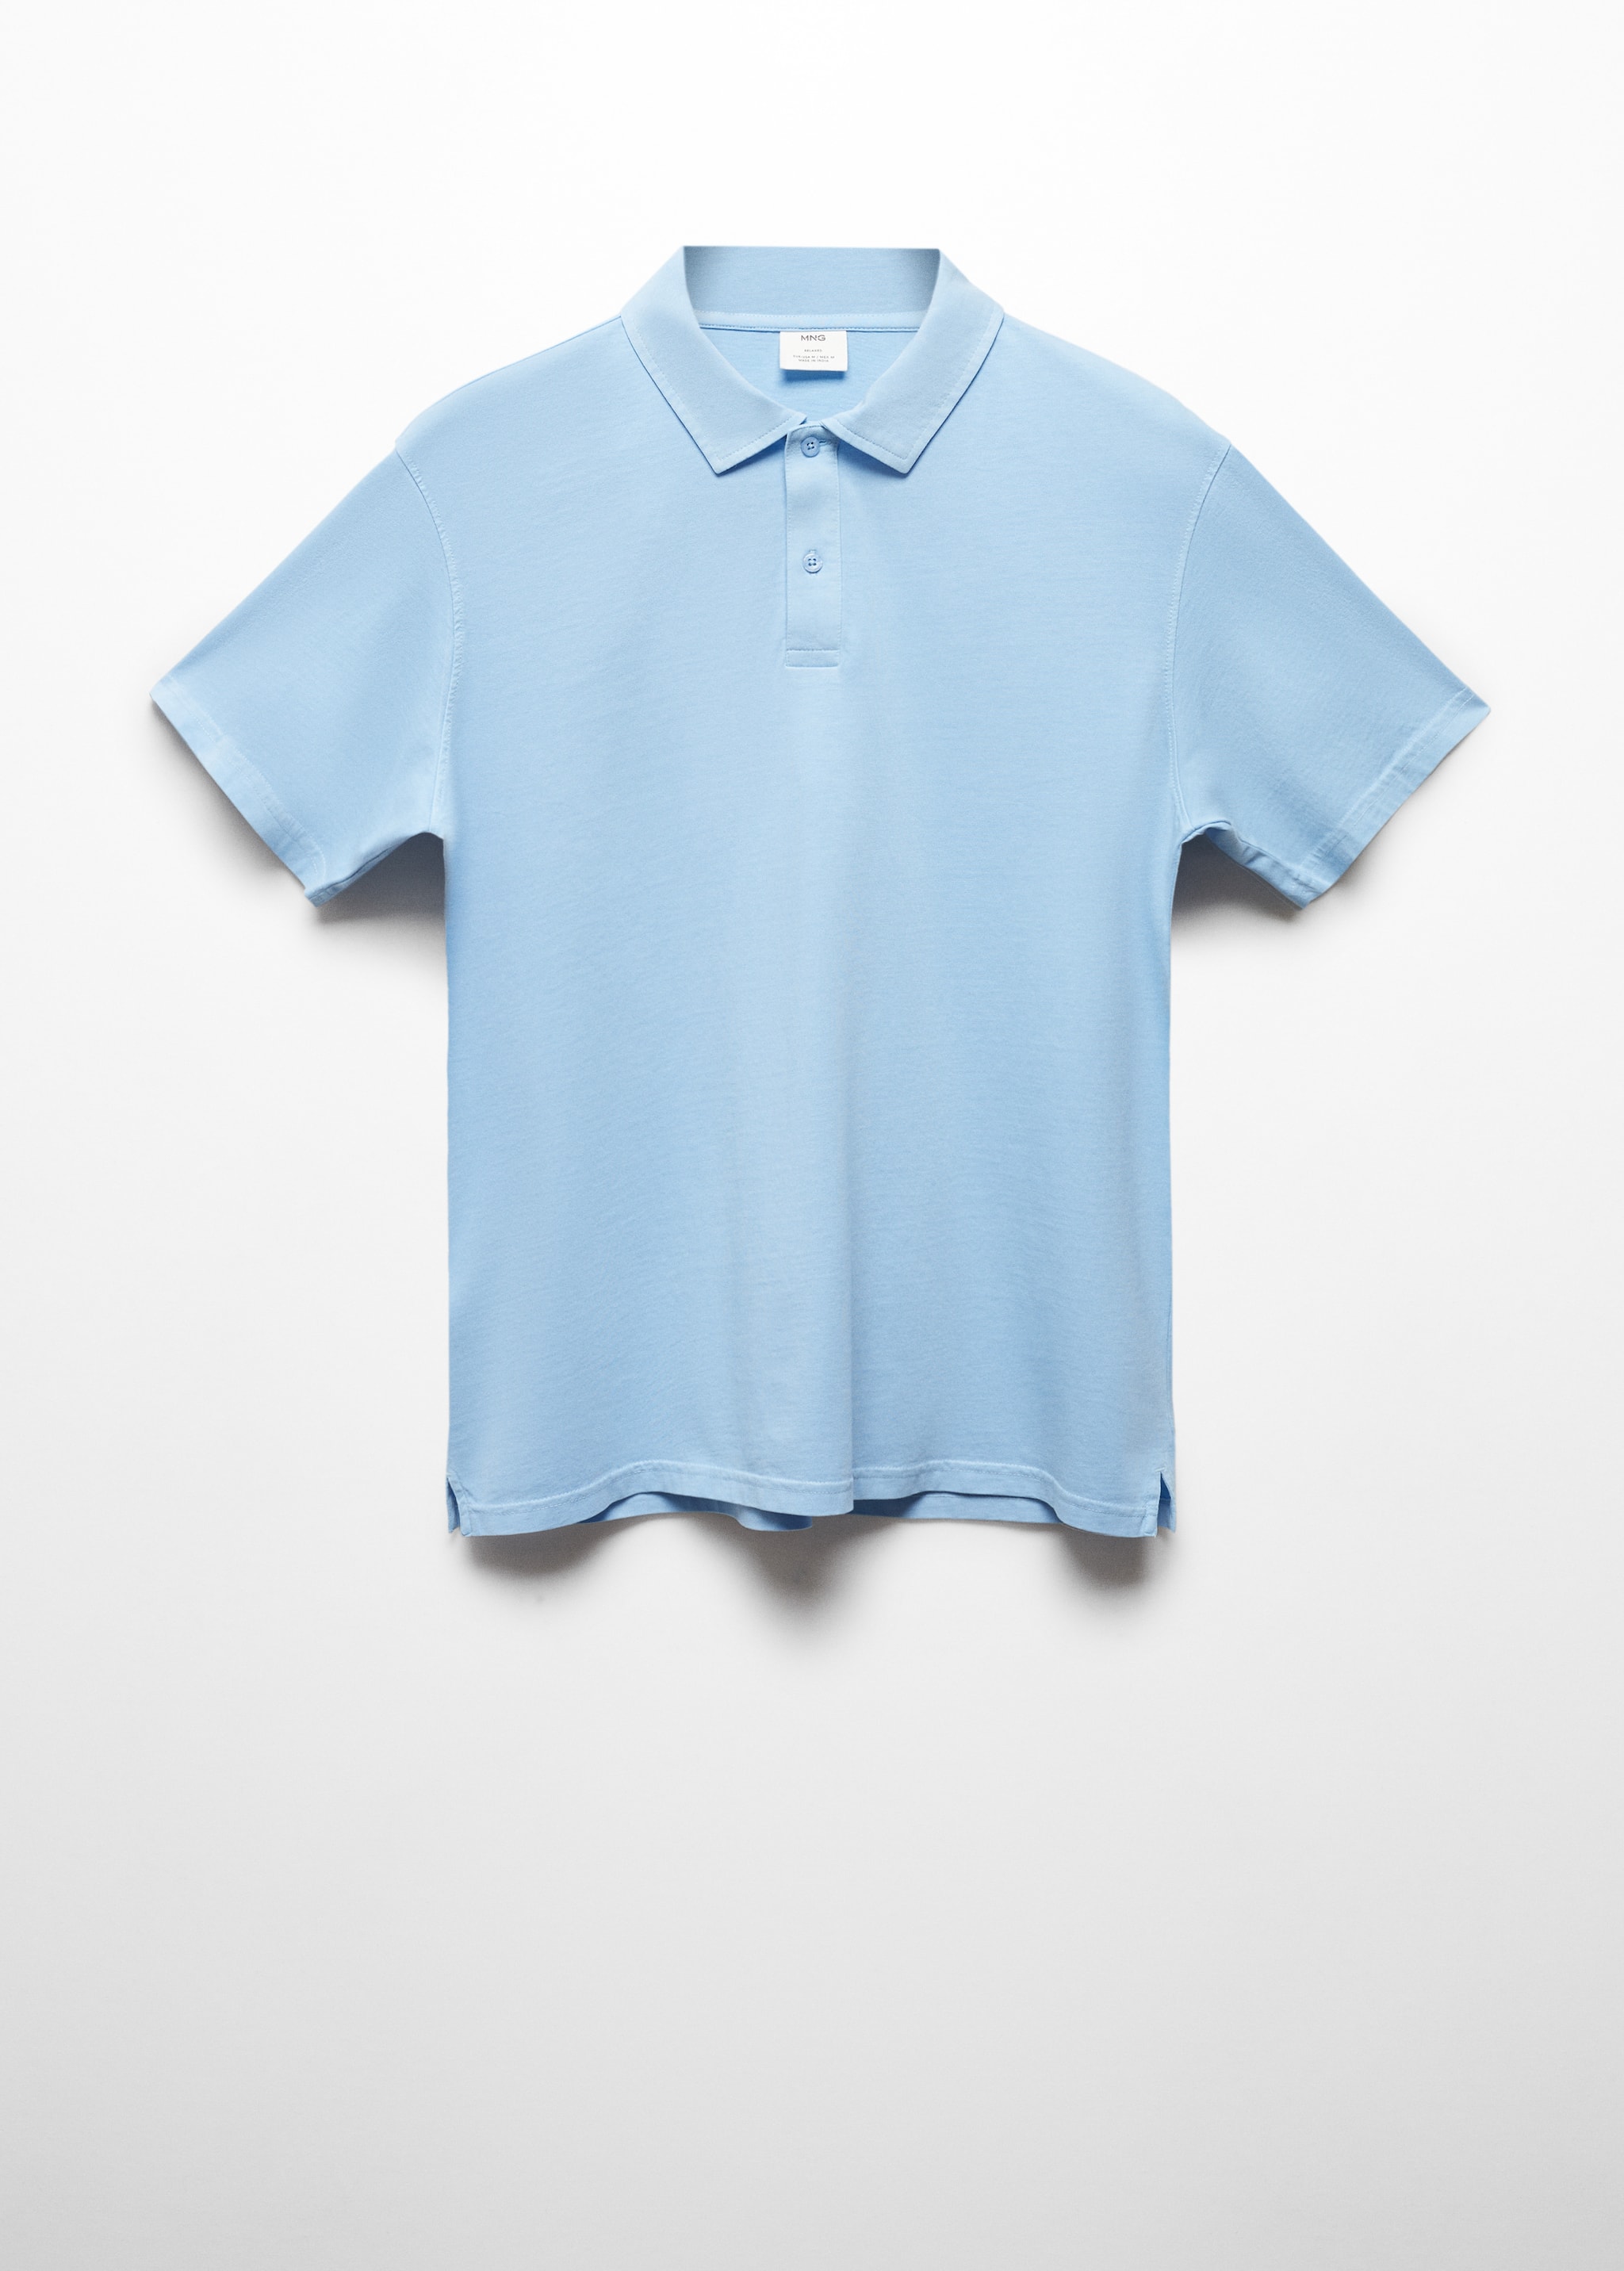 100% cotton relaxed fit polo shirt - Article without model